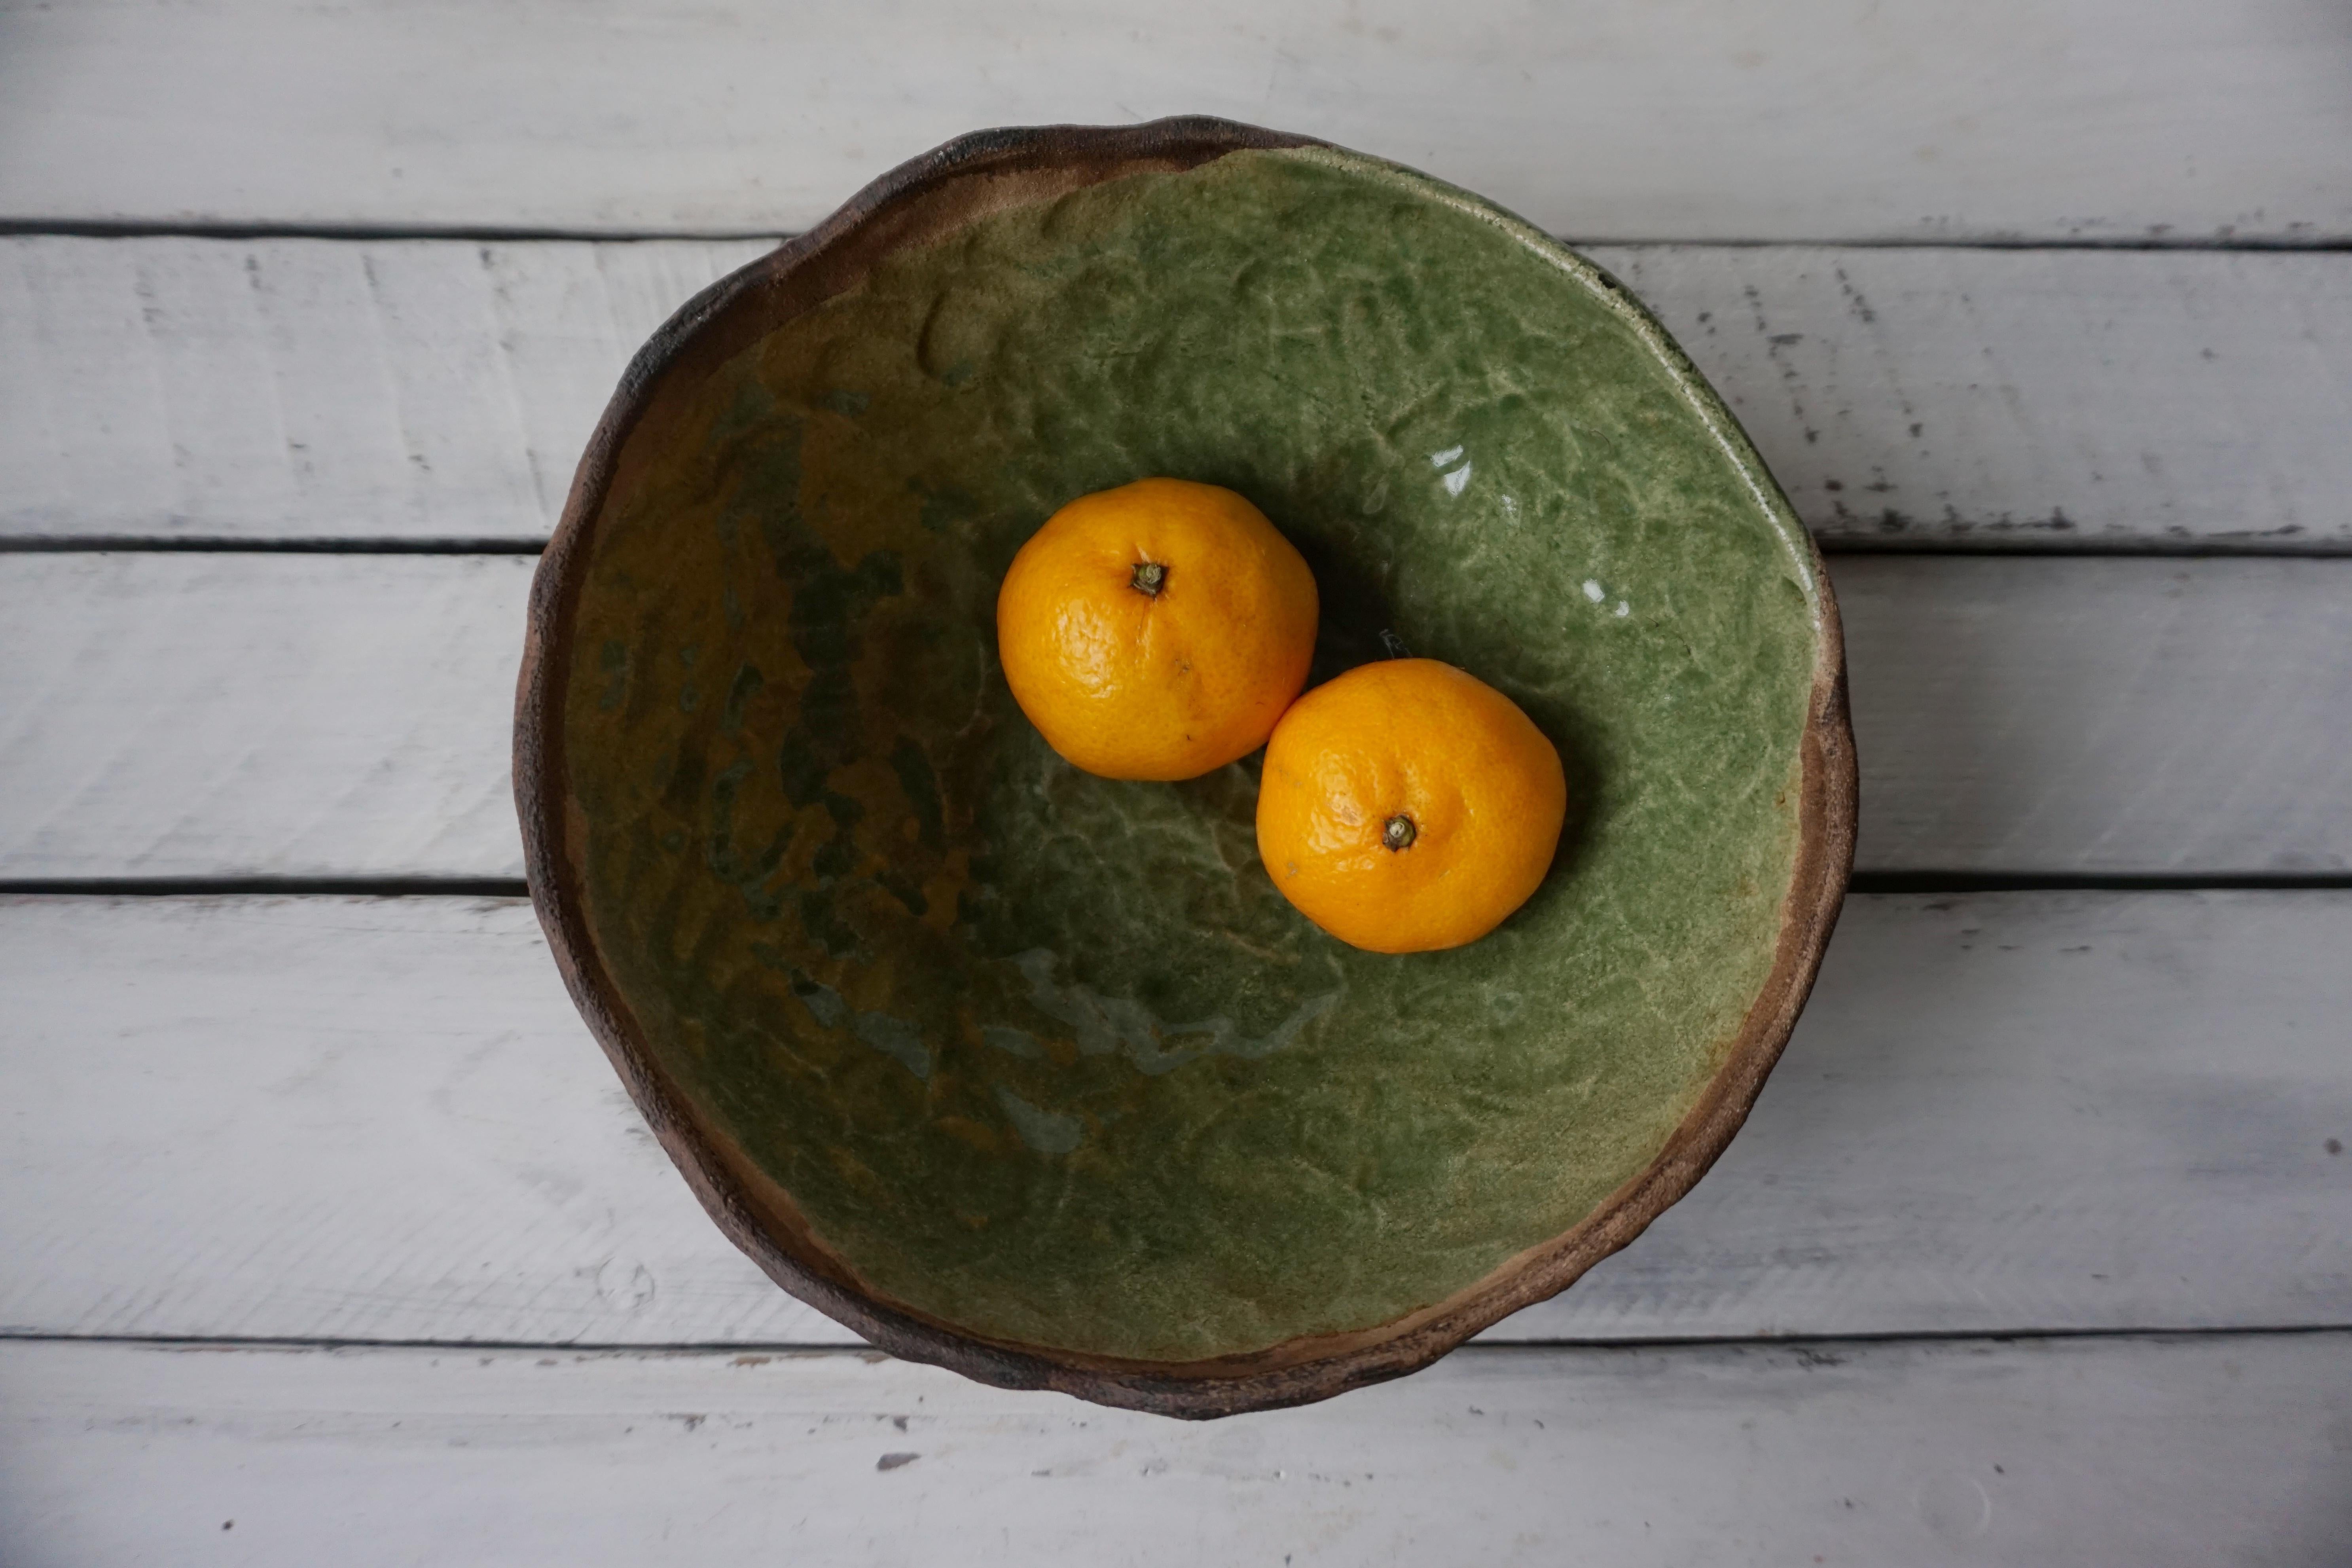 This rustic green ceramic bowl is handmade by Ukrainian artist Kate Voronina based in Ukraine. The bowl is made in a traditional hand-built technique without a potter's wheel with a milk glaze. That's why it has an incredible texture - you can